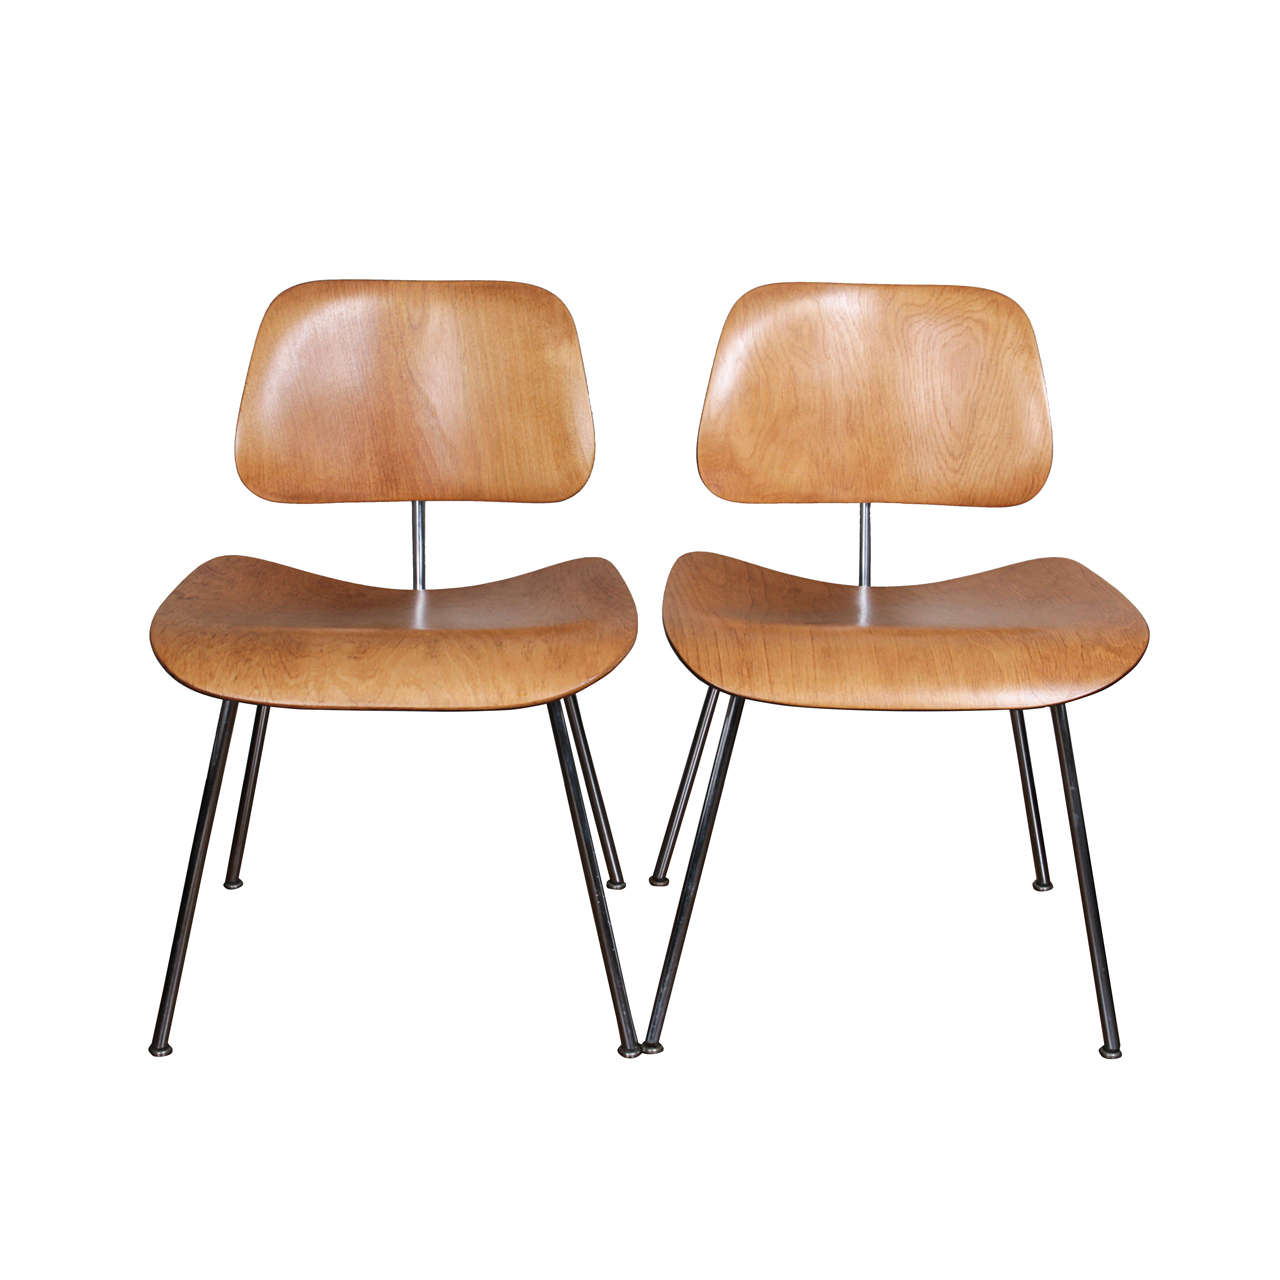 Pair of Charles Eames DCM's